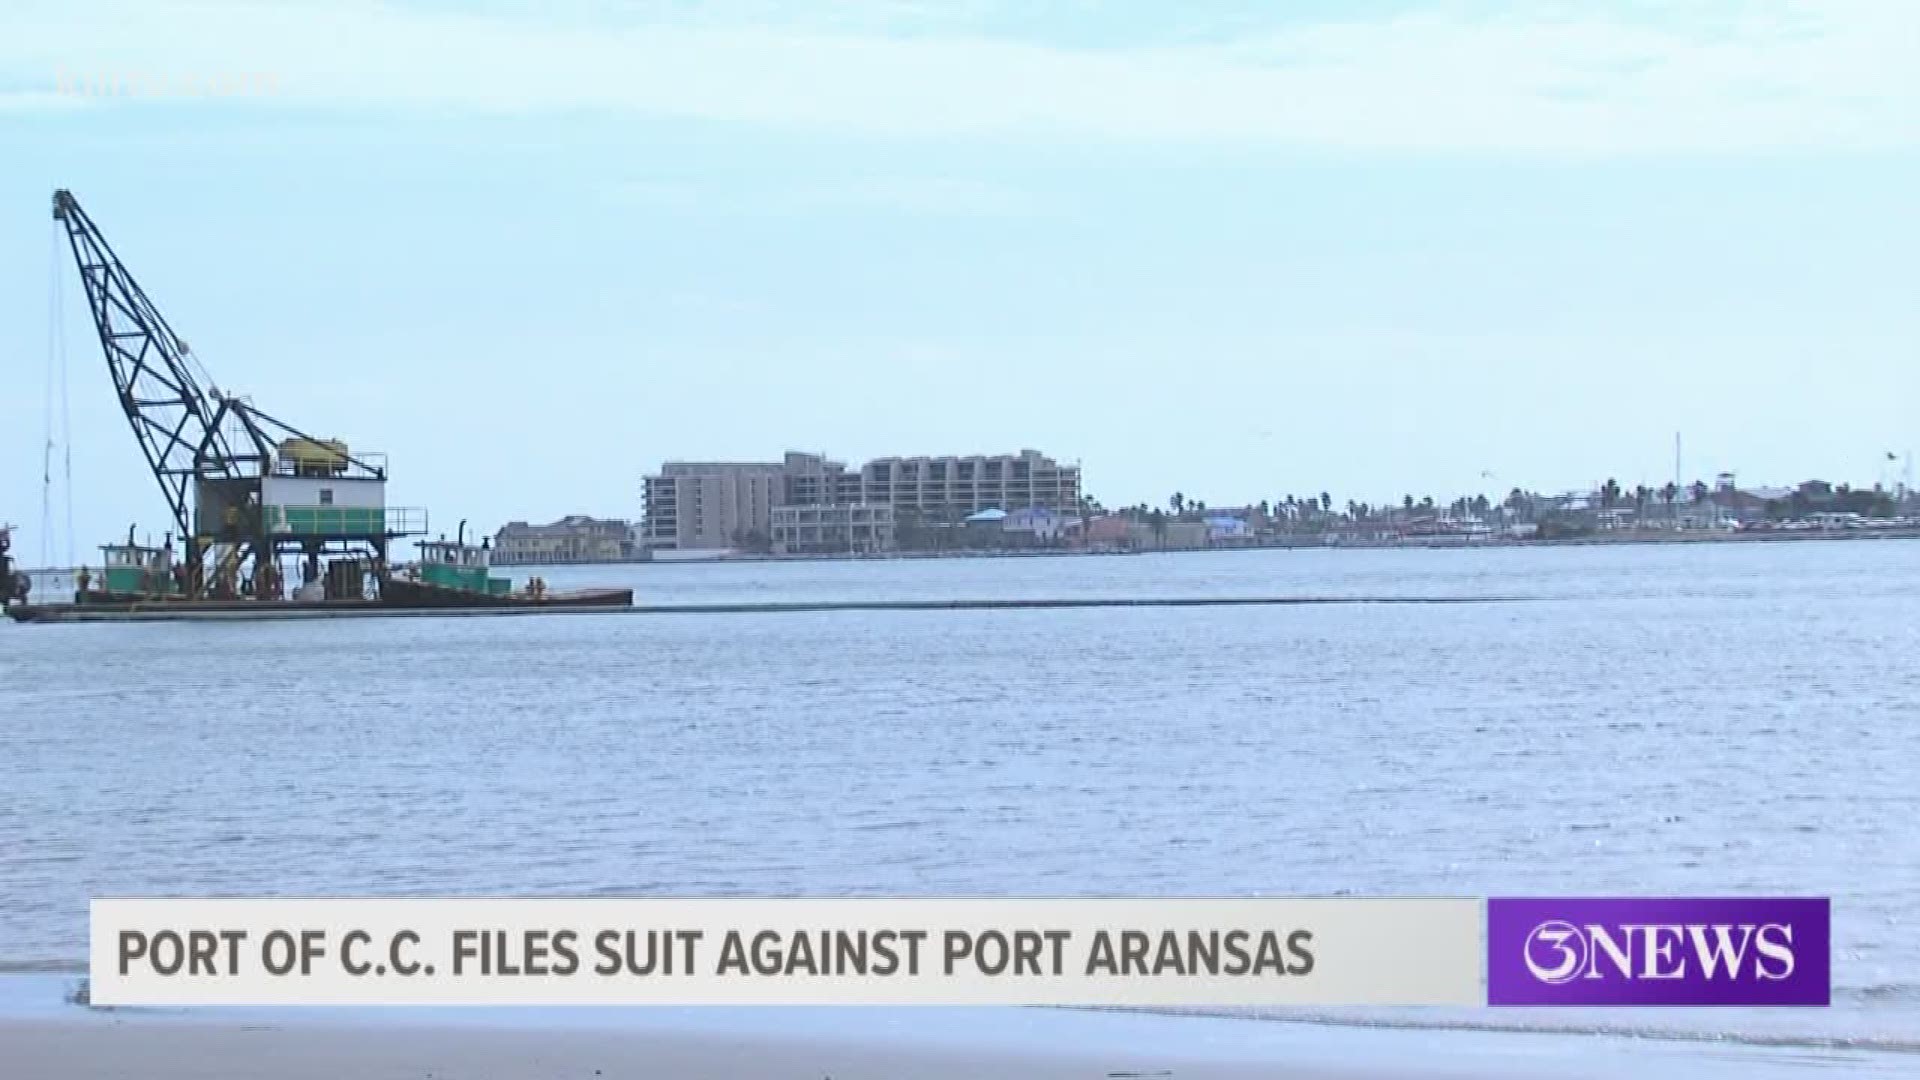 The Port of Corpus Christi filed a lawsuit Wednesday against the City of Port Aransas to tried to terminate a 30-year lease of the Port Aransas City Marina. The Marina is on the Port of Corpus Christi property.